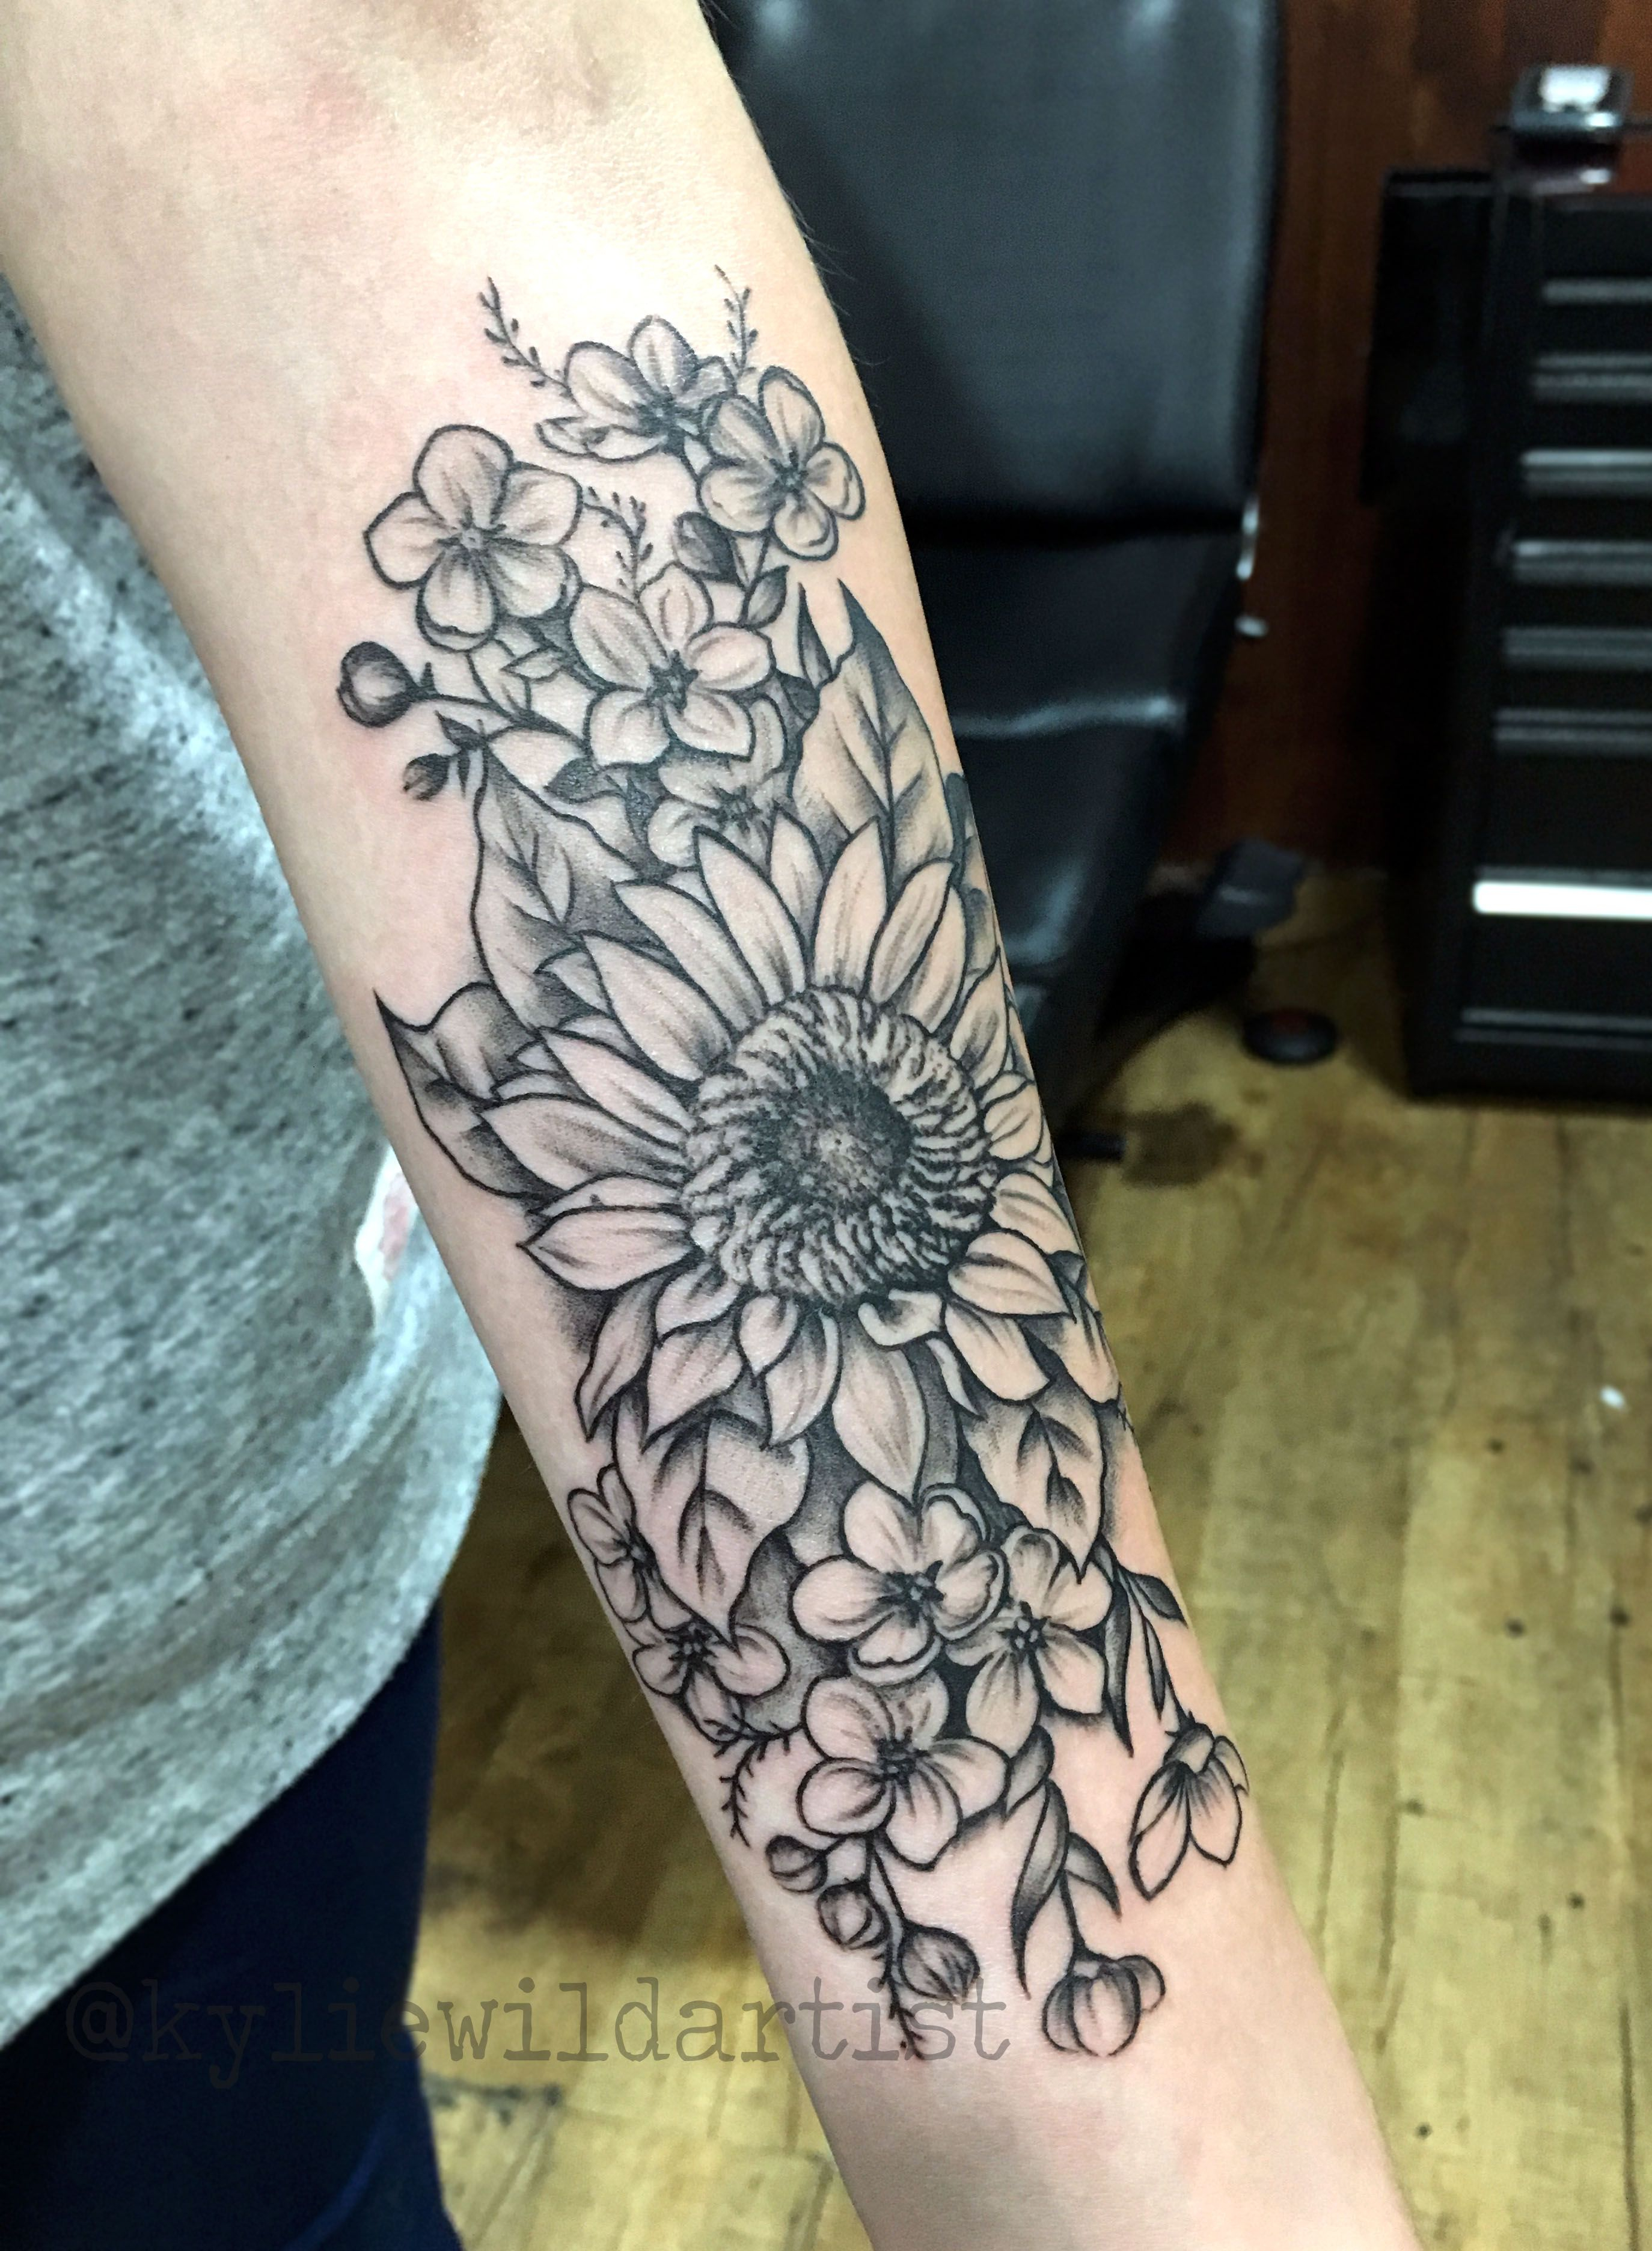 Sunflower And Cherry Blossoms Forearm Tattoo Kylie Wild Heslop throughout dimensions 2748 X 3744